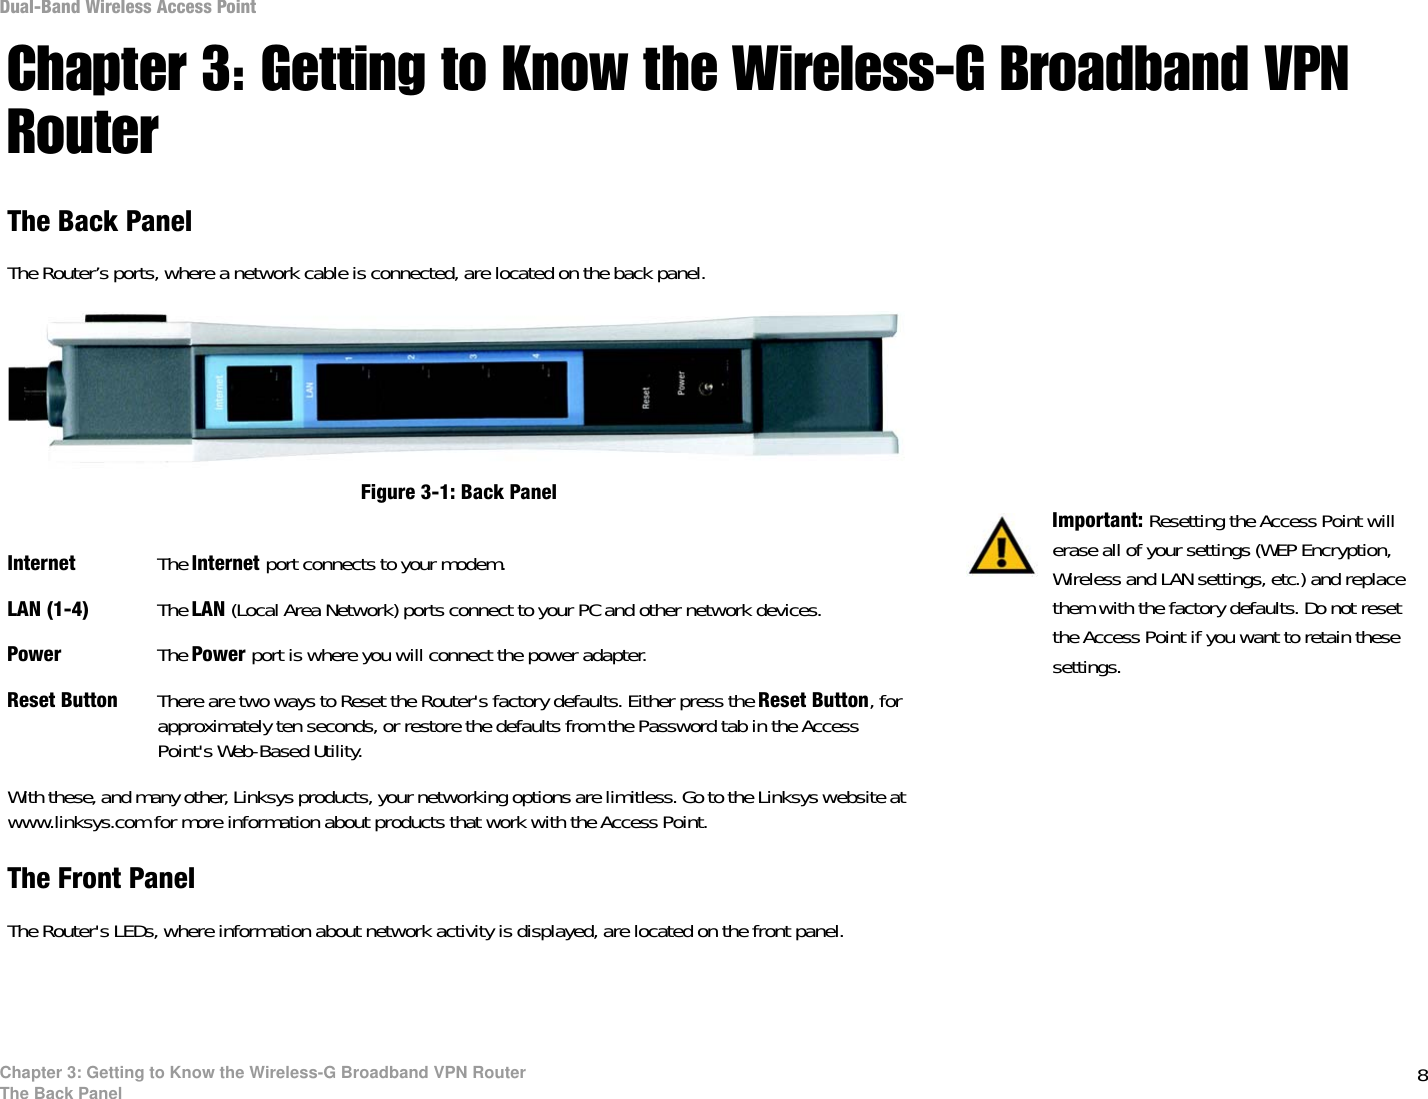 8Chapter 3: Getting to Know the Wireless-G Broadband VPN RouterThe Back PanelDual-Band Wireless Access PointChapter 3: Getting to Know the Wireless-G Broadband VPN RouterThe Back PanelThe Router’s ports, where a network cable is connected, are located on the back panel.Internet The Internet port connects to your modem.LAN (1-4) The LAN (Local Area Network) ports connect to your PC and other network devices.Power The Power port is where you will connect the power adapter.Reset Button There are two ways to Reset the Router&apos;s factory defaults. Either press the Reset Button, for approximately ten seconds, or restore the defaults from the Password tab in the Access Point&apos;s Web-Based Utility.With these, and many other, Linksys products, your networking options are limitless. Go to the Linksys website at www.linksys.com for more information about products that work with the Access Point. The Front PanelThe Router&apos;s LEDs, where information about network activity is displayed, are located on the front panel.Important: Resetting the Access Point will erase all of your settings (WEP Encryption, Wireless and LAN settings, etc.) and replace them with the factory defaults. Do not reset the Access Point if you want to retain these settings.Figure 3-1: Back Panel